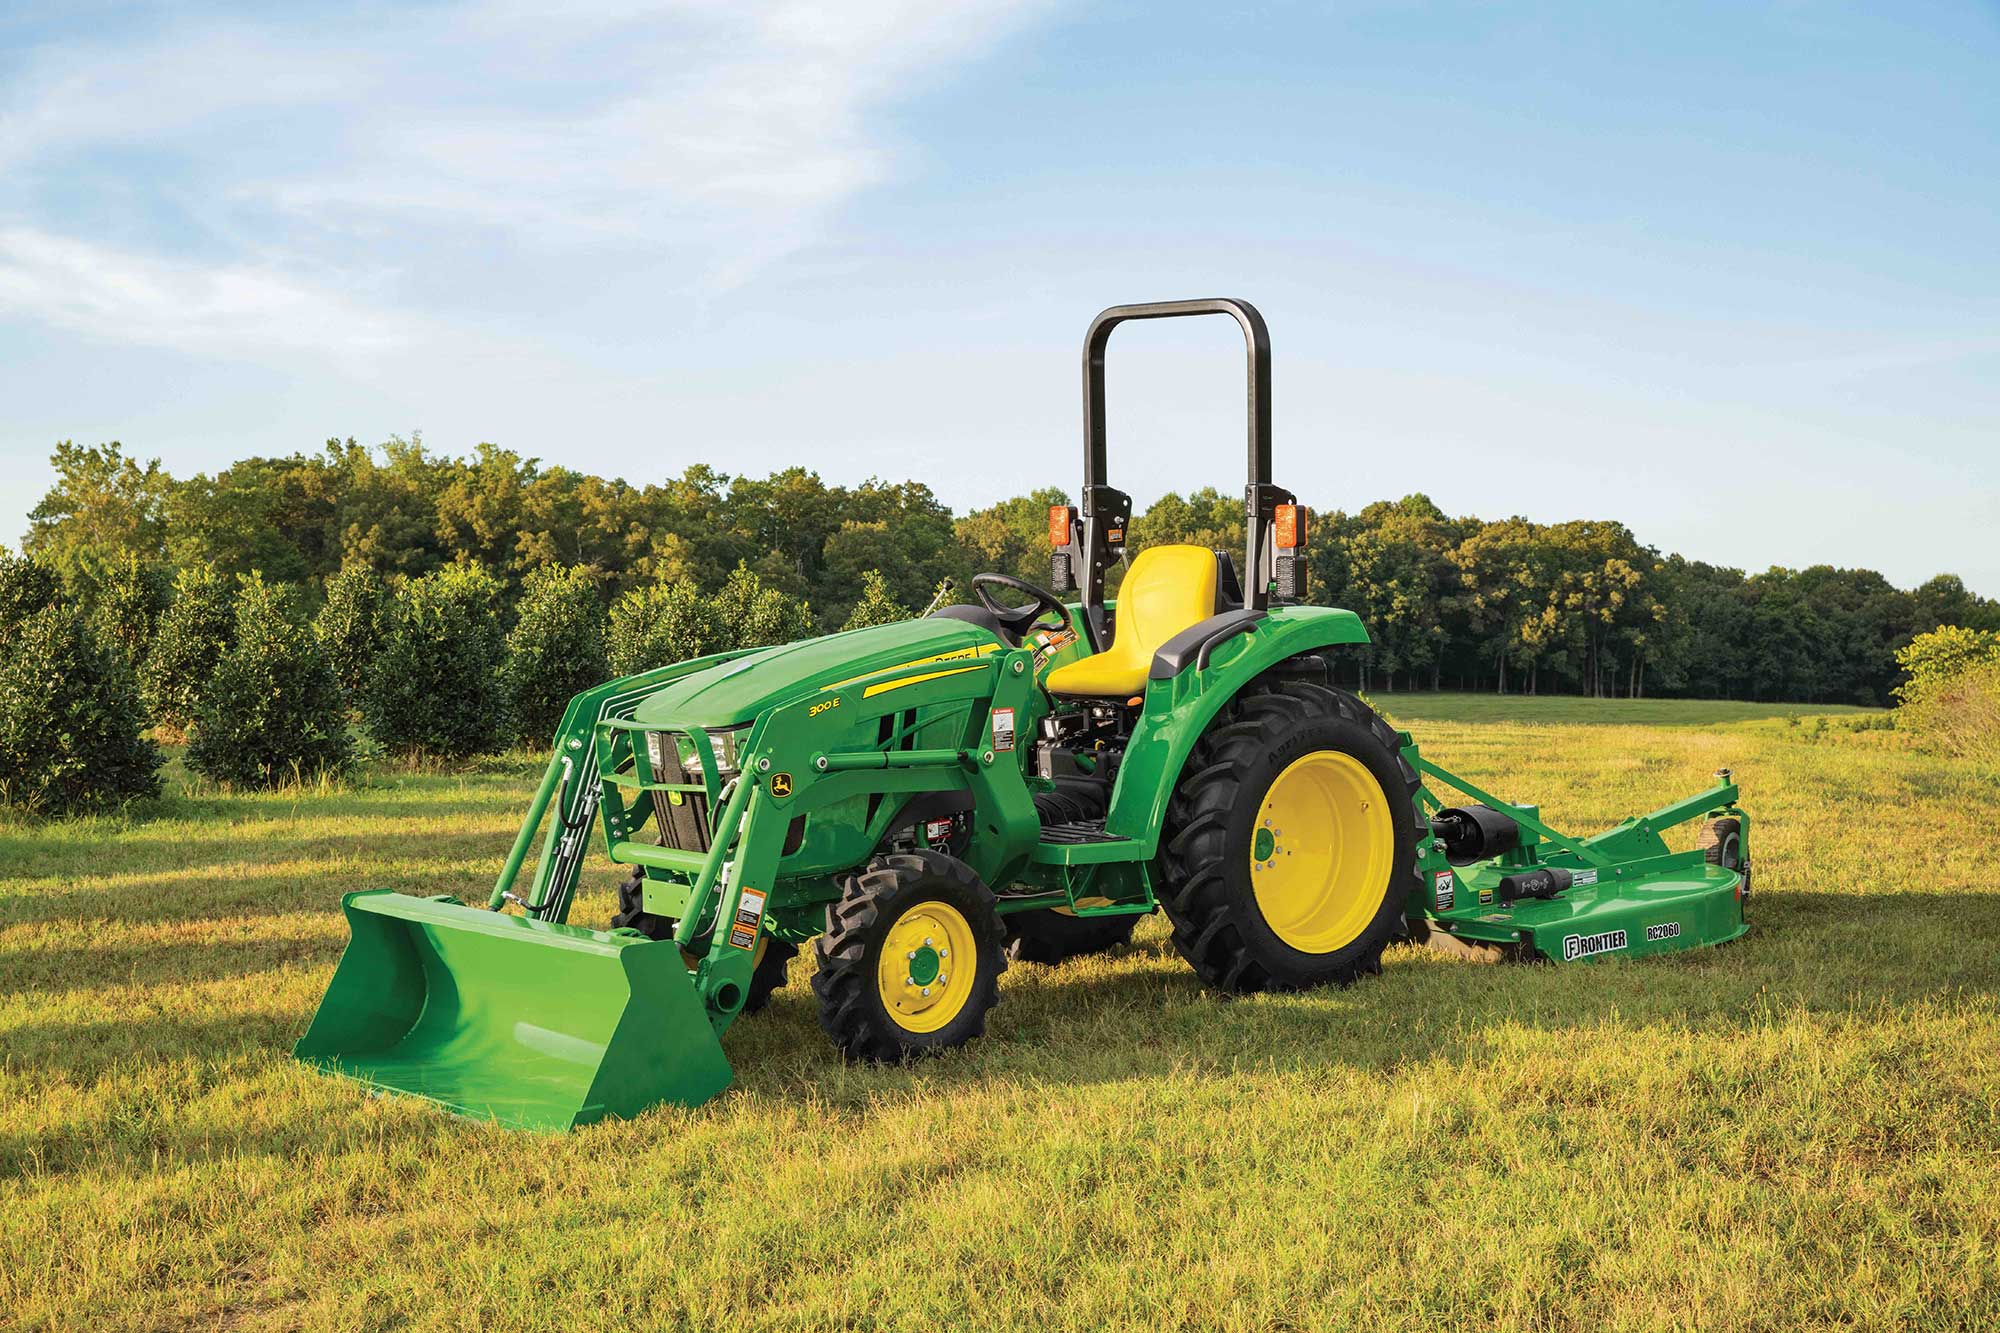 John Deere Launches Rugged Heavy Duty Compact Utility Tractors ...